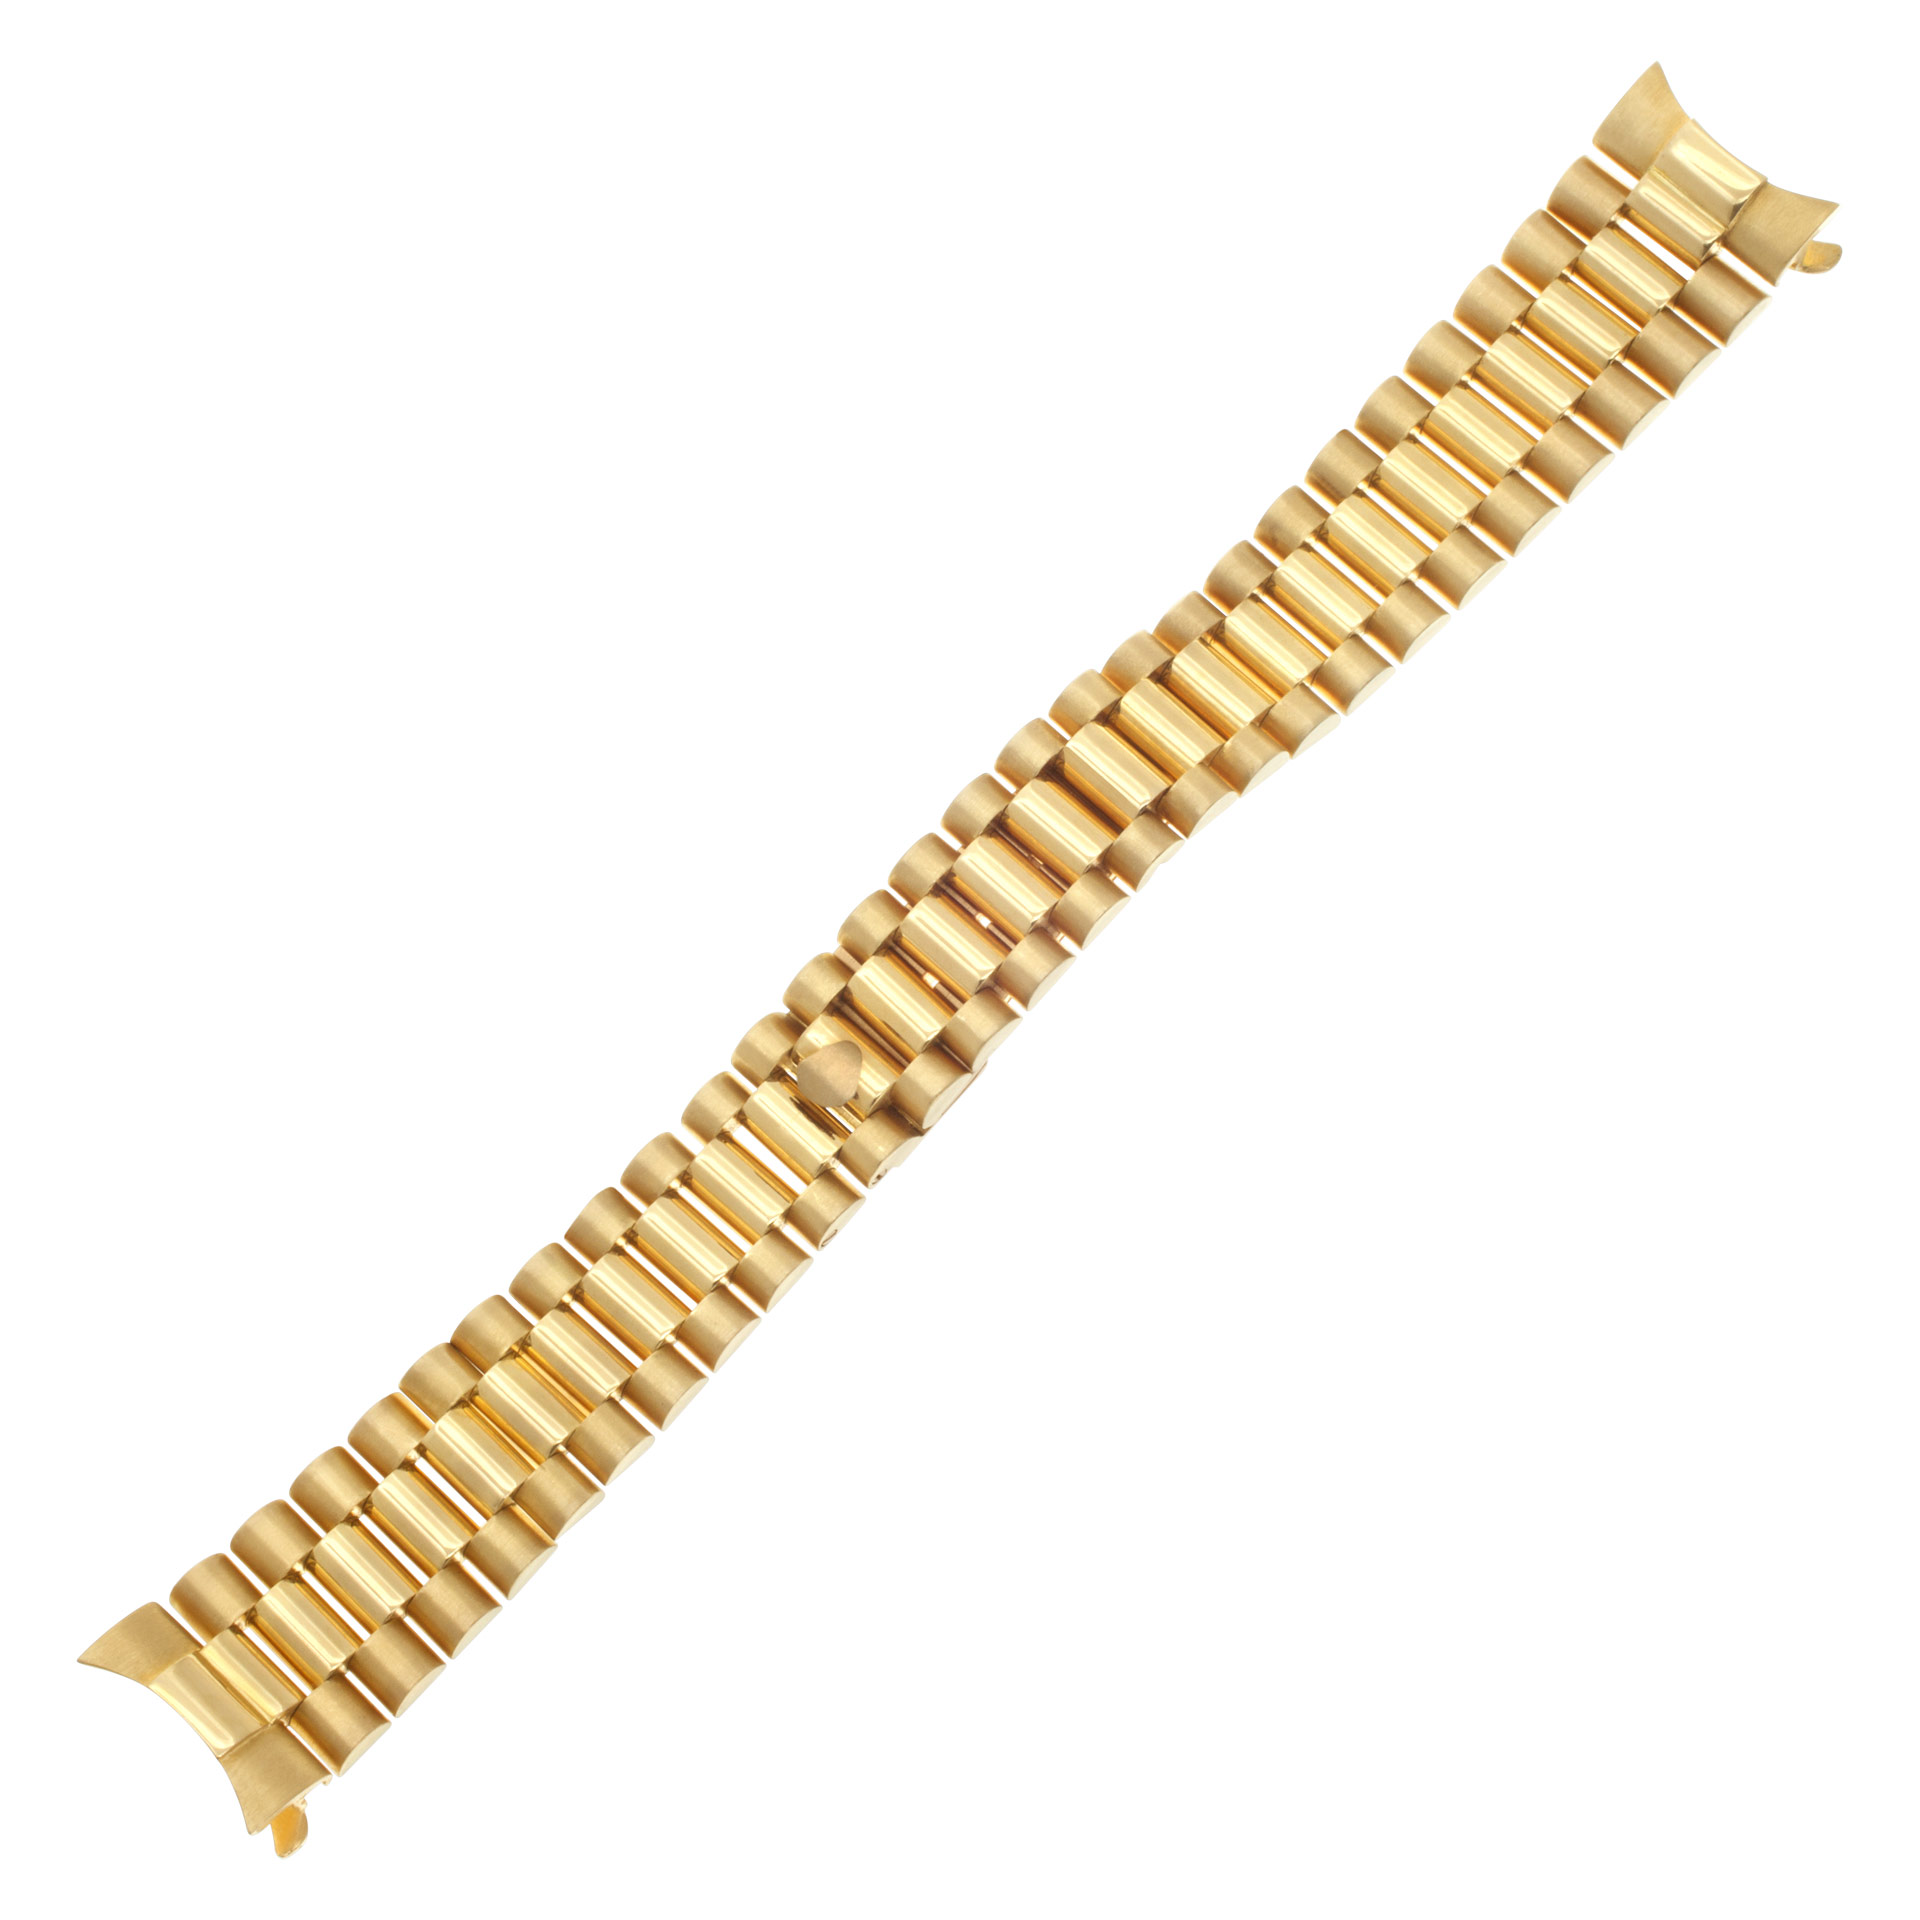 Custom Italian President-style bracelet for midsize Rolex replacement in 18k yellow gold (17mm x 13mm)